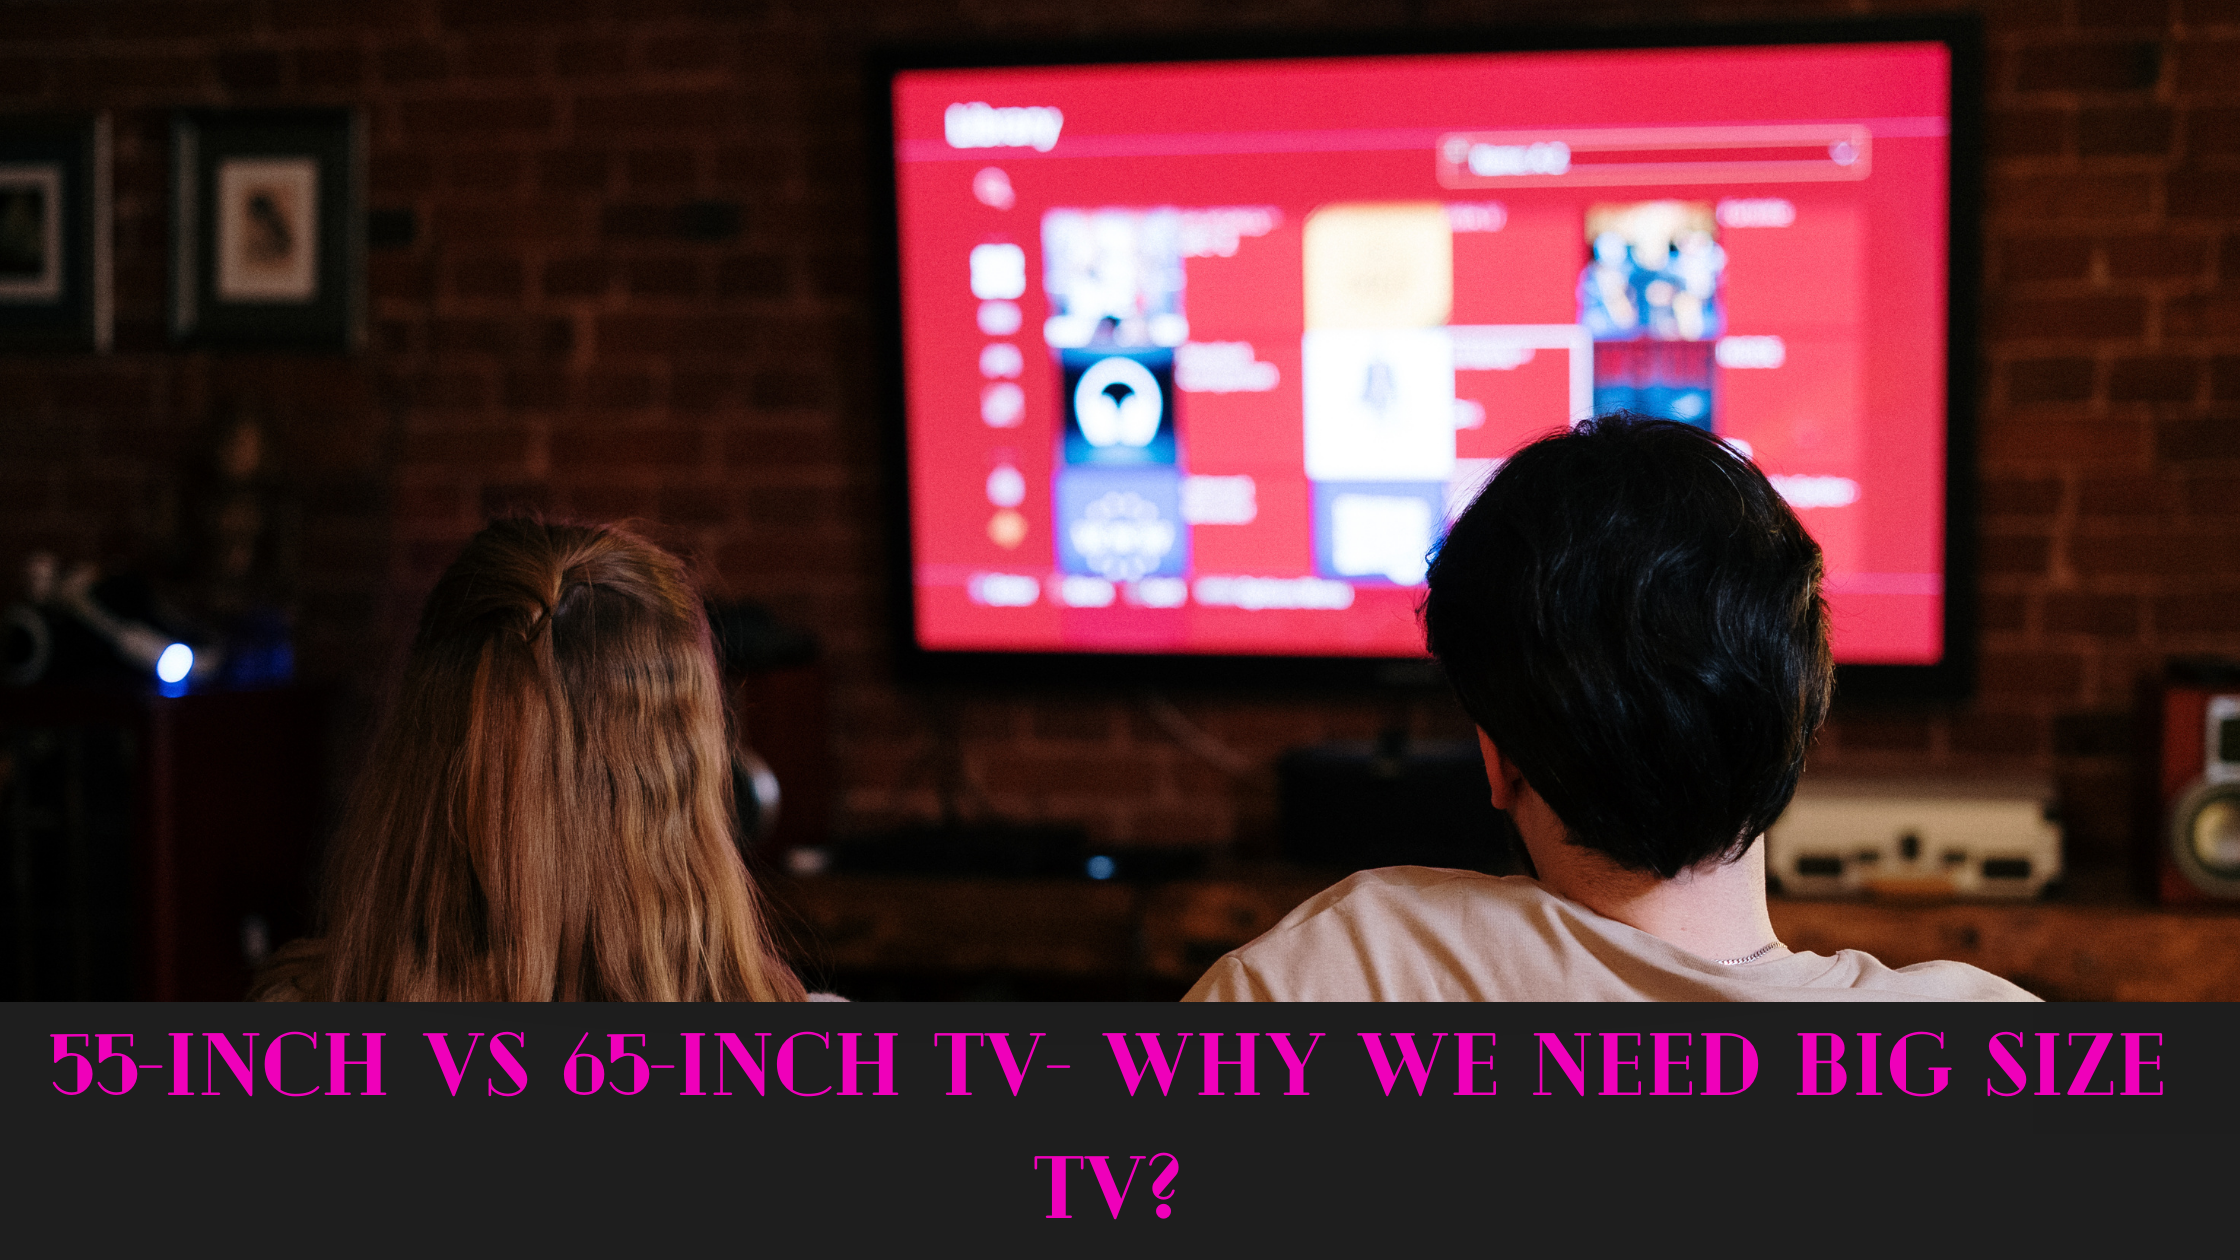 55-inch vs 65-inch TV- Why We Need Big Size TV?